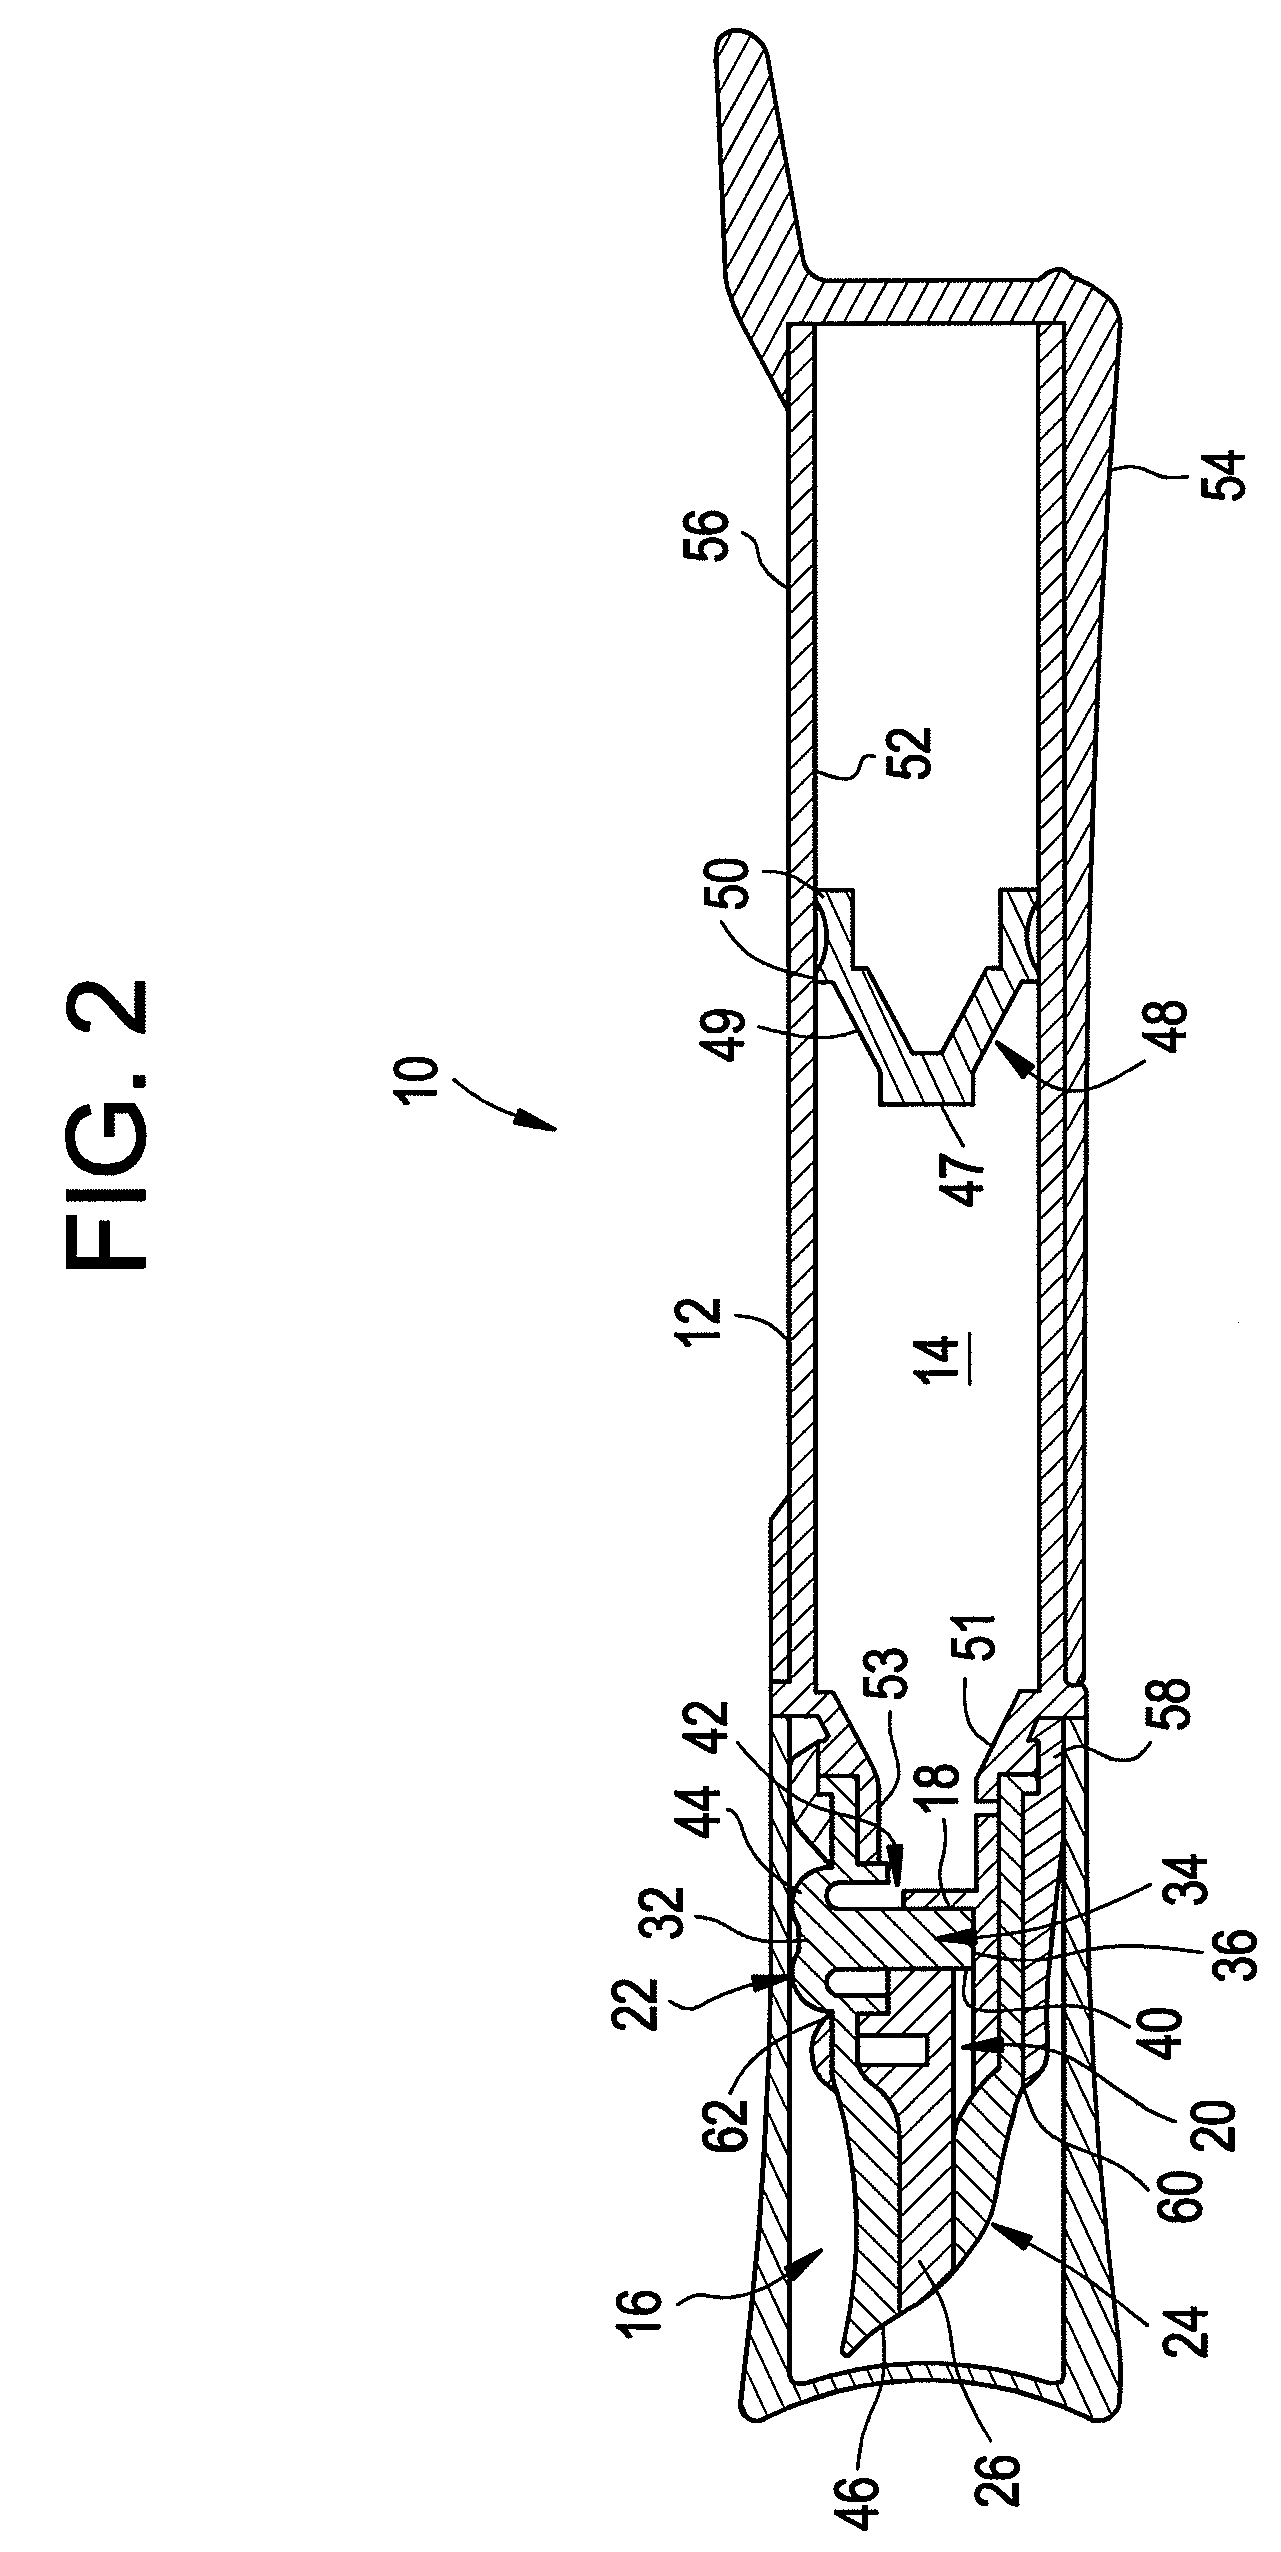 Laterally-actuated dispenser with one-way valve for storing and dispensing metered amounts of substances